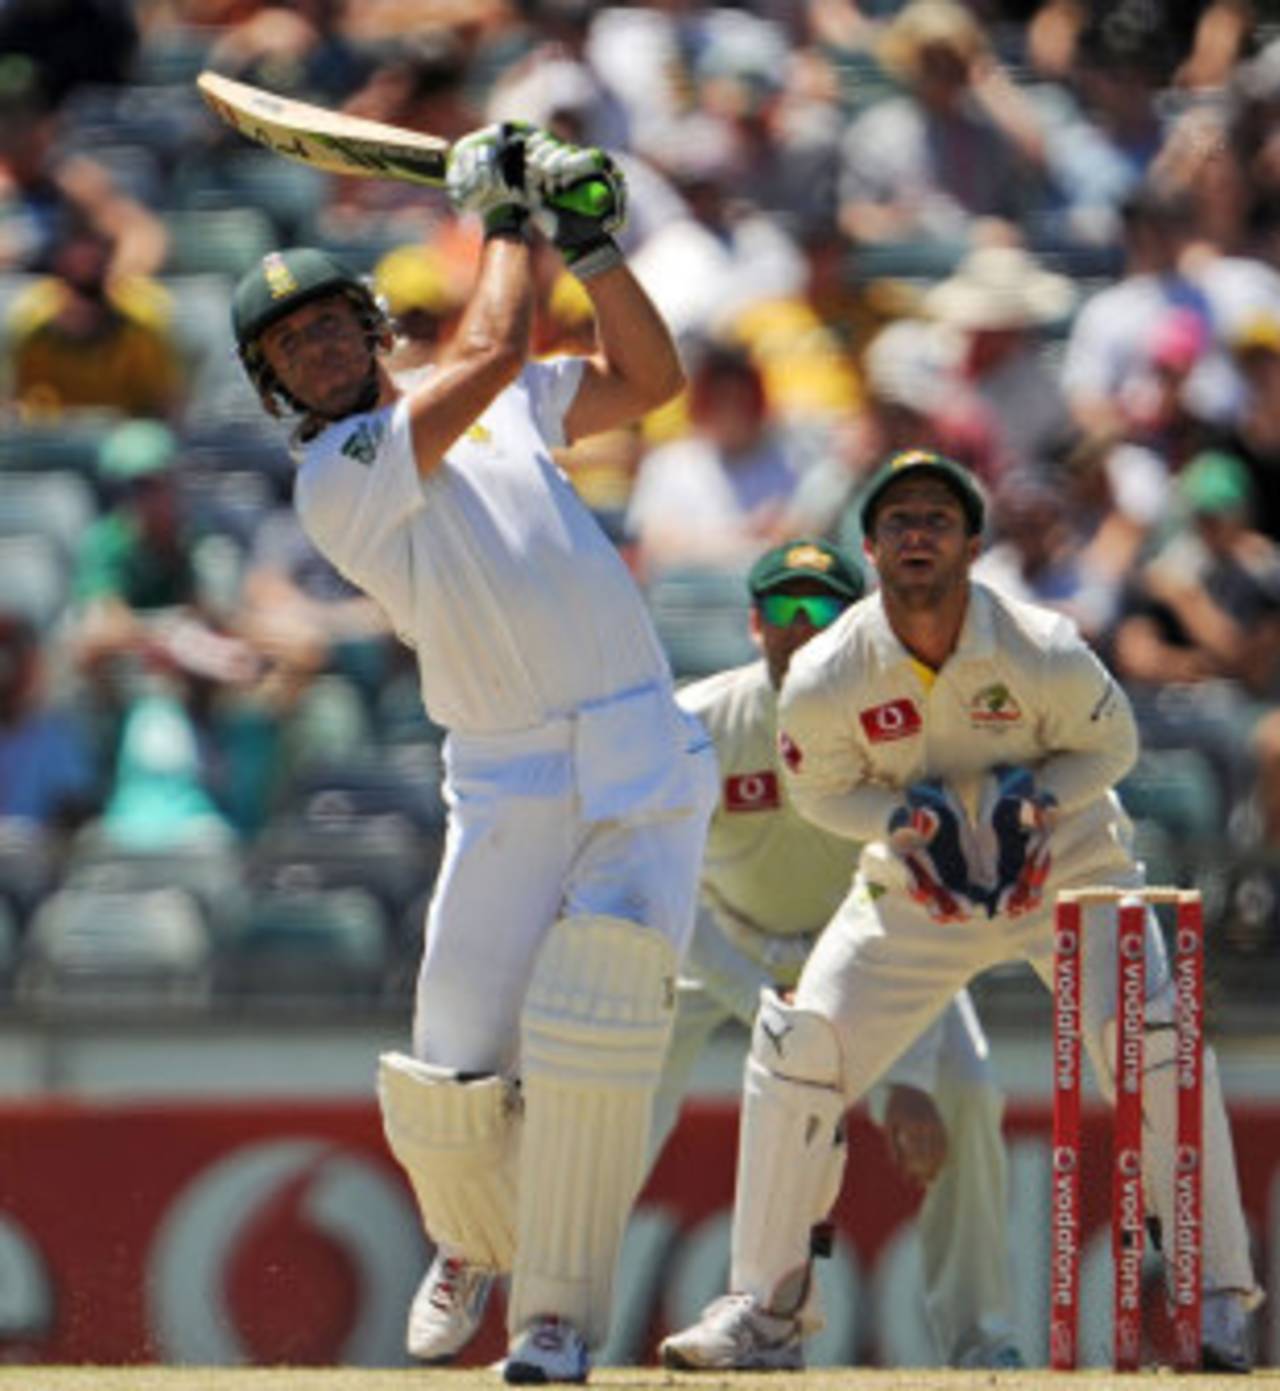 AB de Villiers powers the ball down the ground, Australia v South Africa, third Test, 3rd day, Perth, December 2, 2012